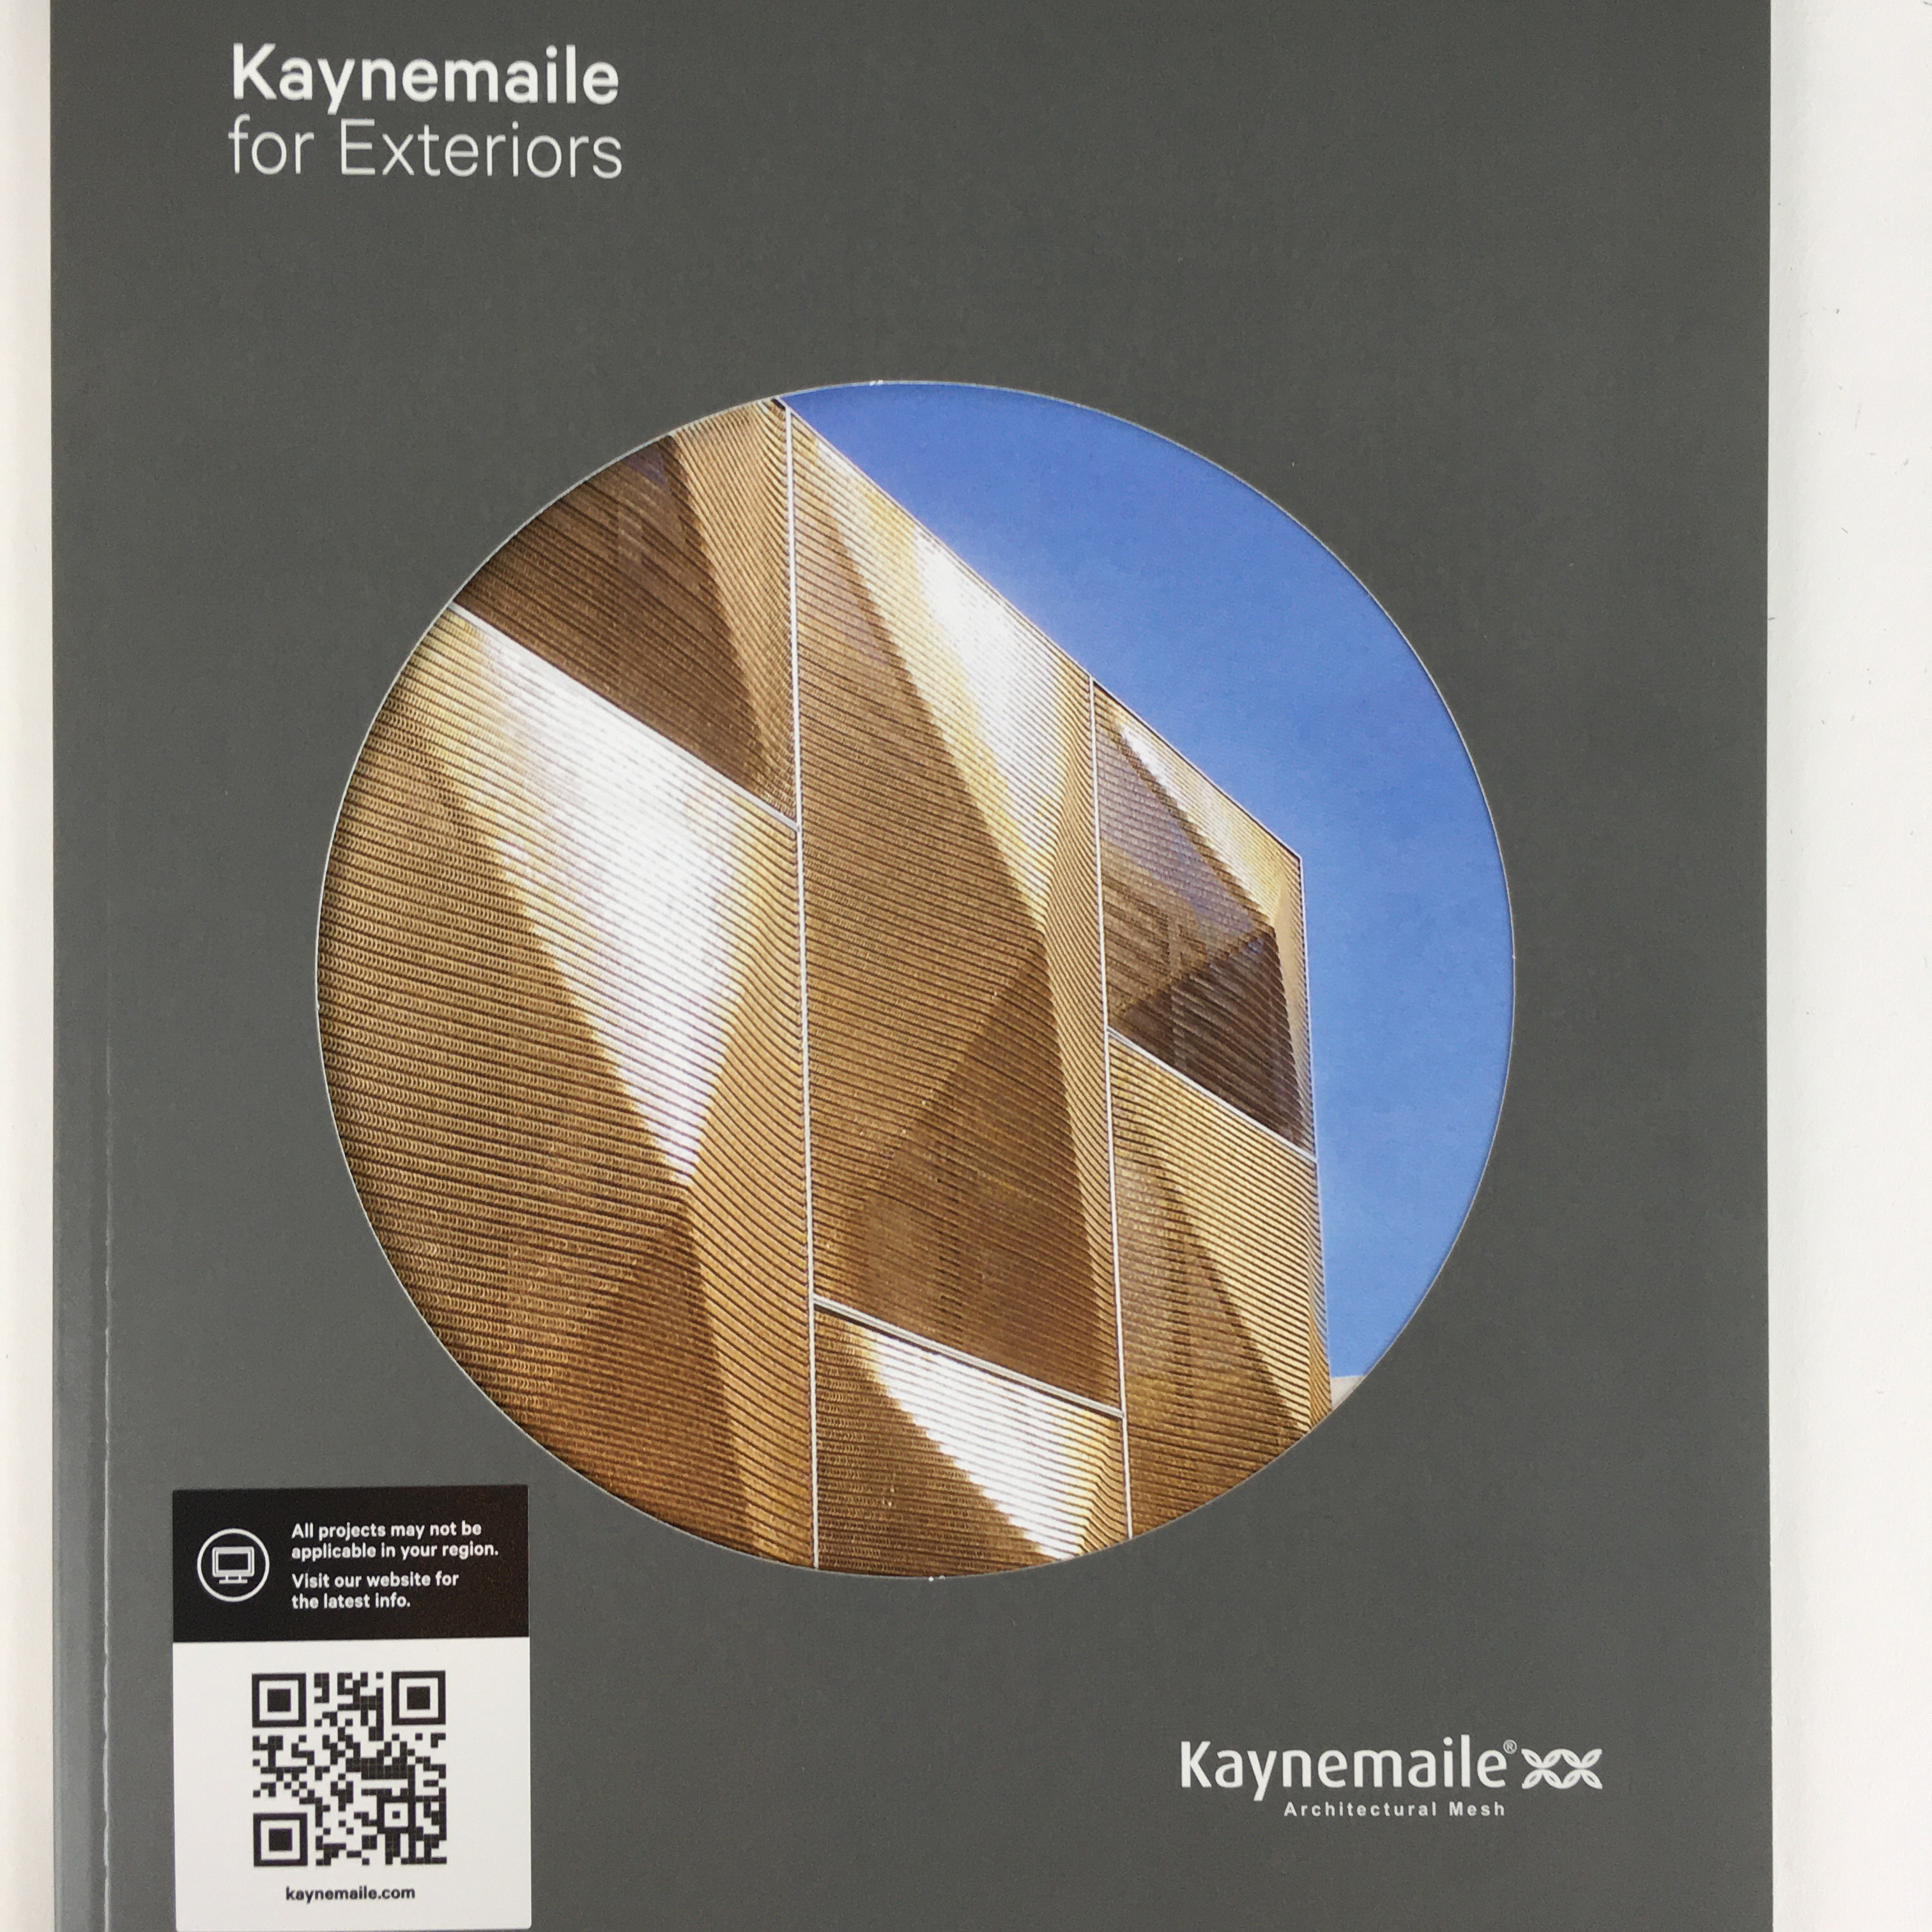 Spec-Systems_Kaynemaile_Exteriors-Brochure_Web